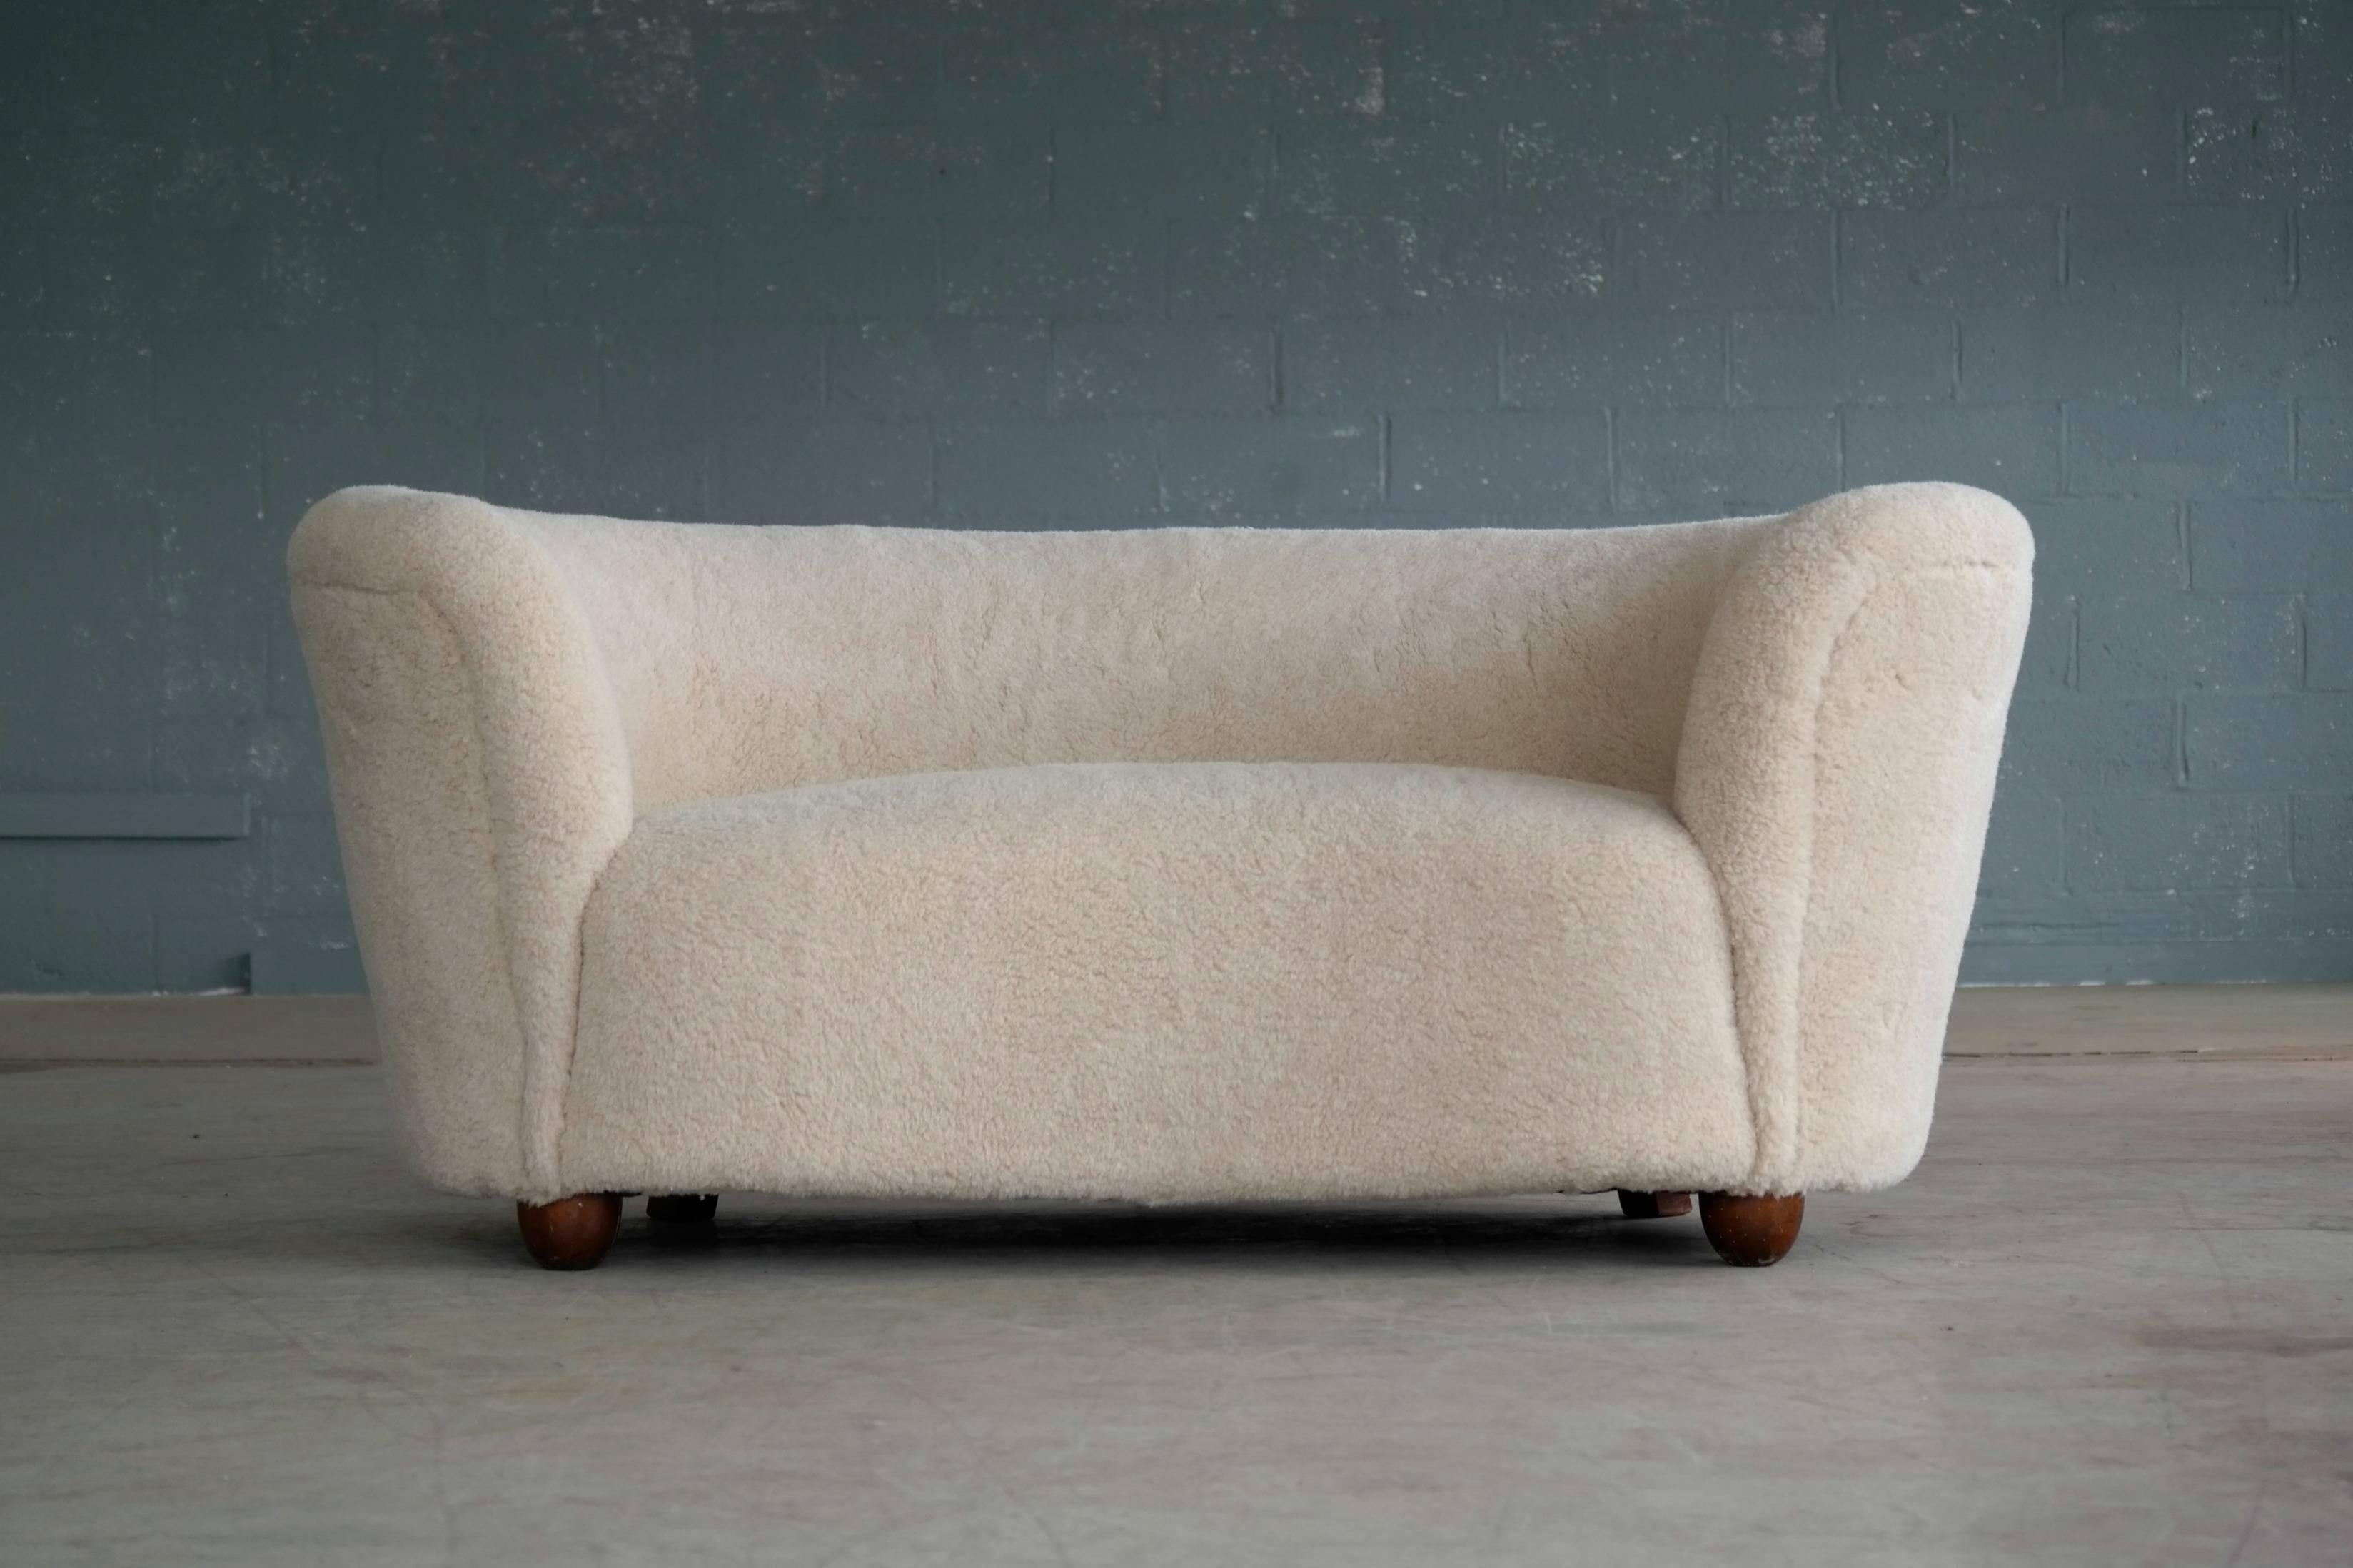 Banana shaped Viggo Boesen style curved two-seat sofa or loveseat attributed to Slagelse Møbelværk. This sofa will make a strong statement in any room. Beautiful round lines and iconic ball feet normally associated with Viggo Boesen. Fully